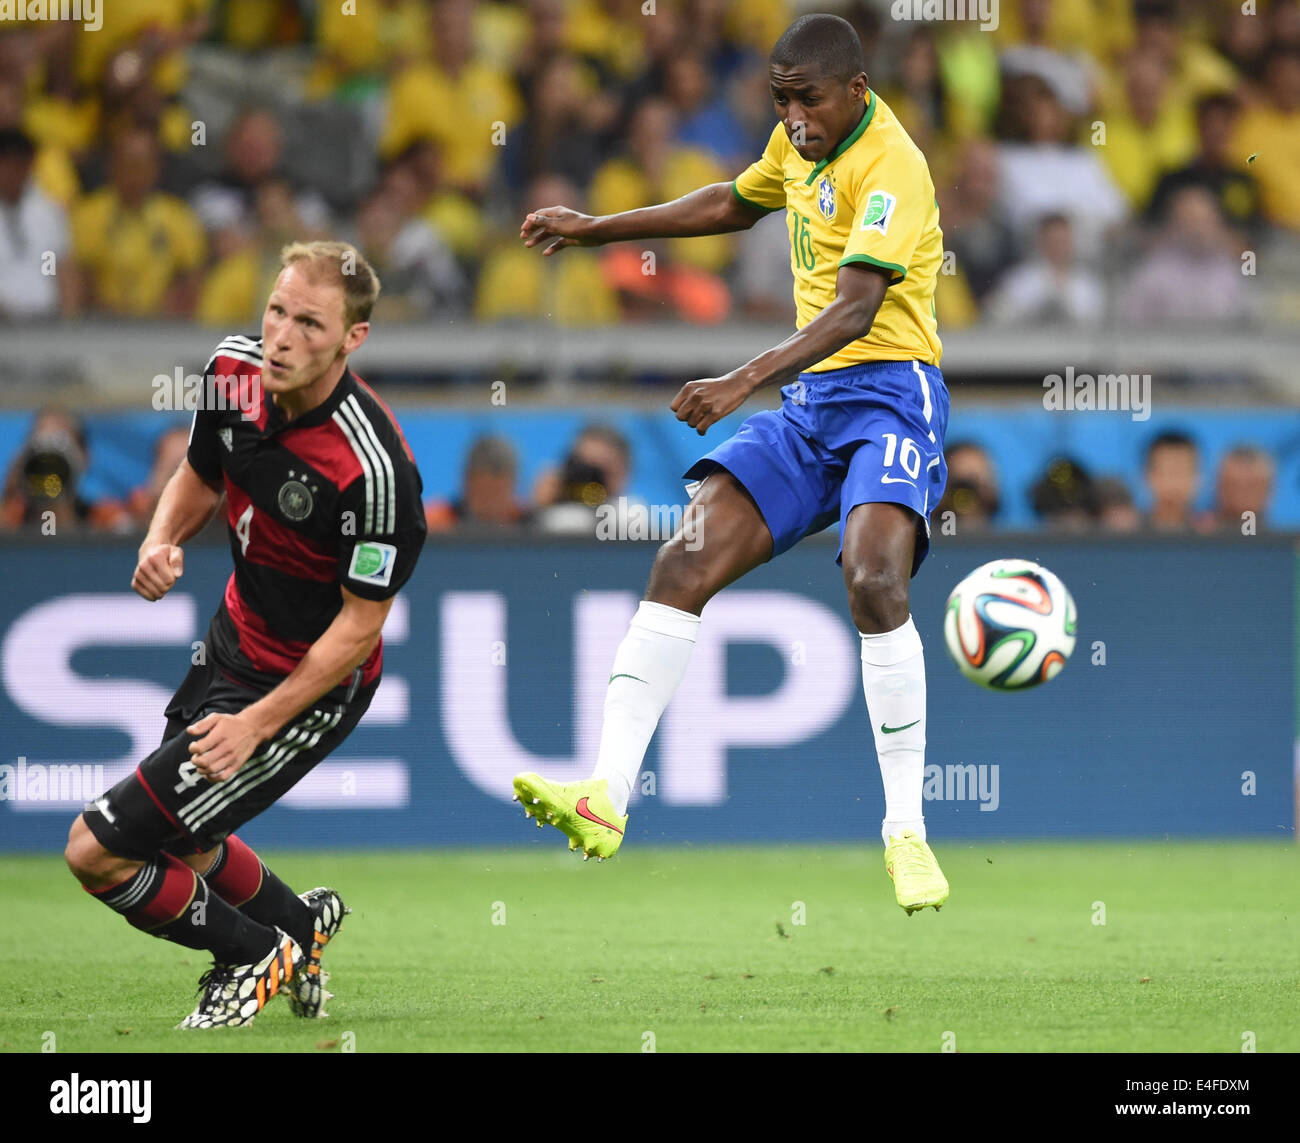 Belo Horizonte, Brazil. 08th June, 2014. Germany?s Benedikt Hoewedes (L) and Brazil's Ramires vie for the ball during the FIFA World Cup 2014 semi-final match between Brazil and Germany at the Estadio Mineirao in Belo Horizonte, Brazil, 08 June 2014. Photo: Marcus Brandt/dpa/Alamy Live News Stock Photo